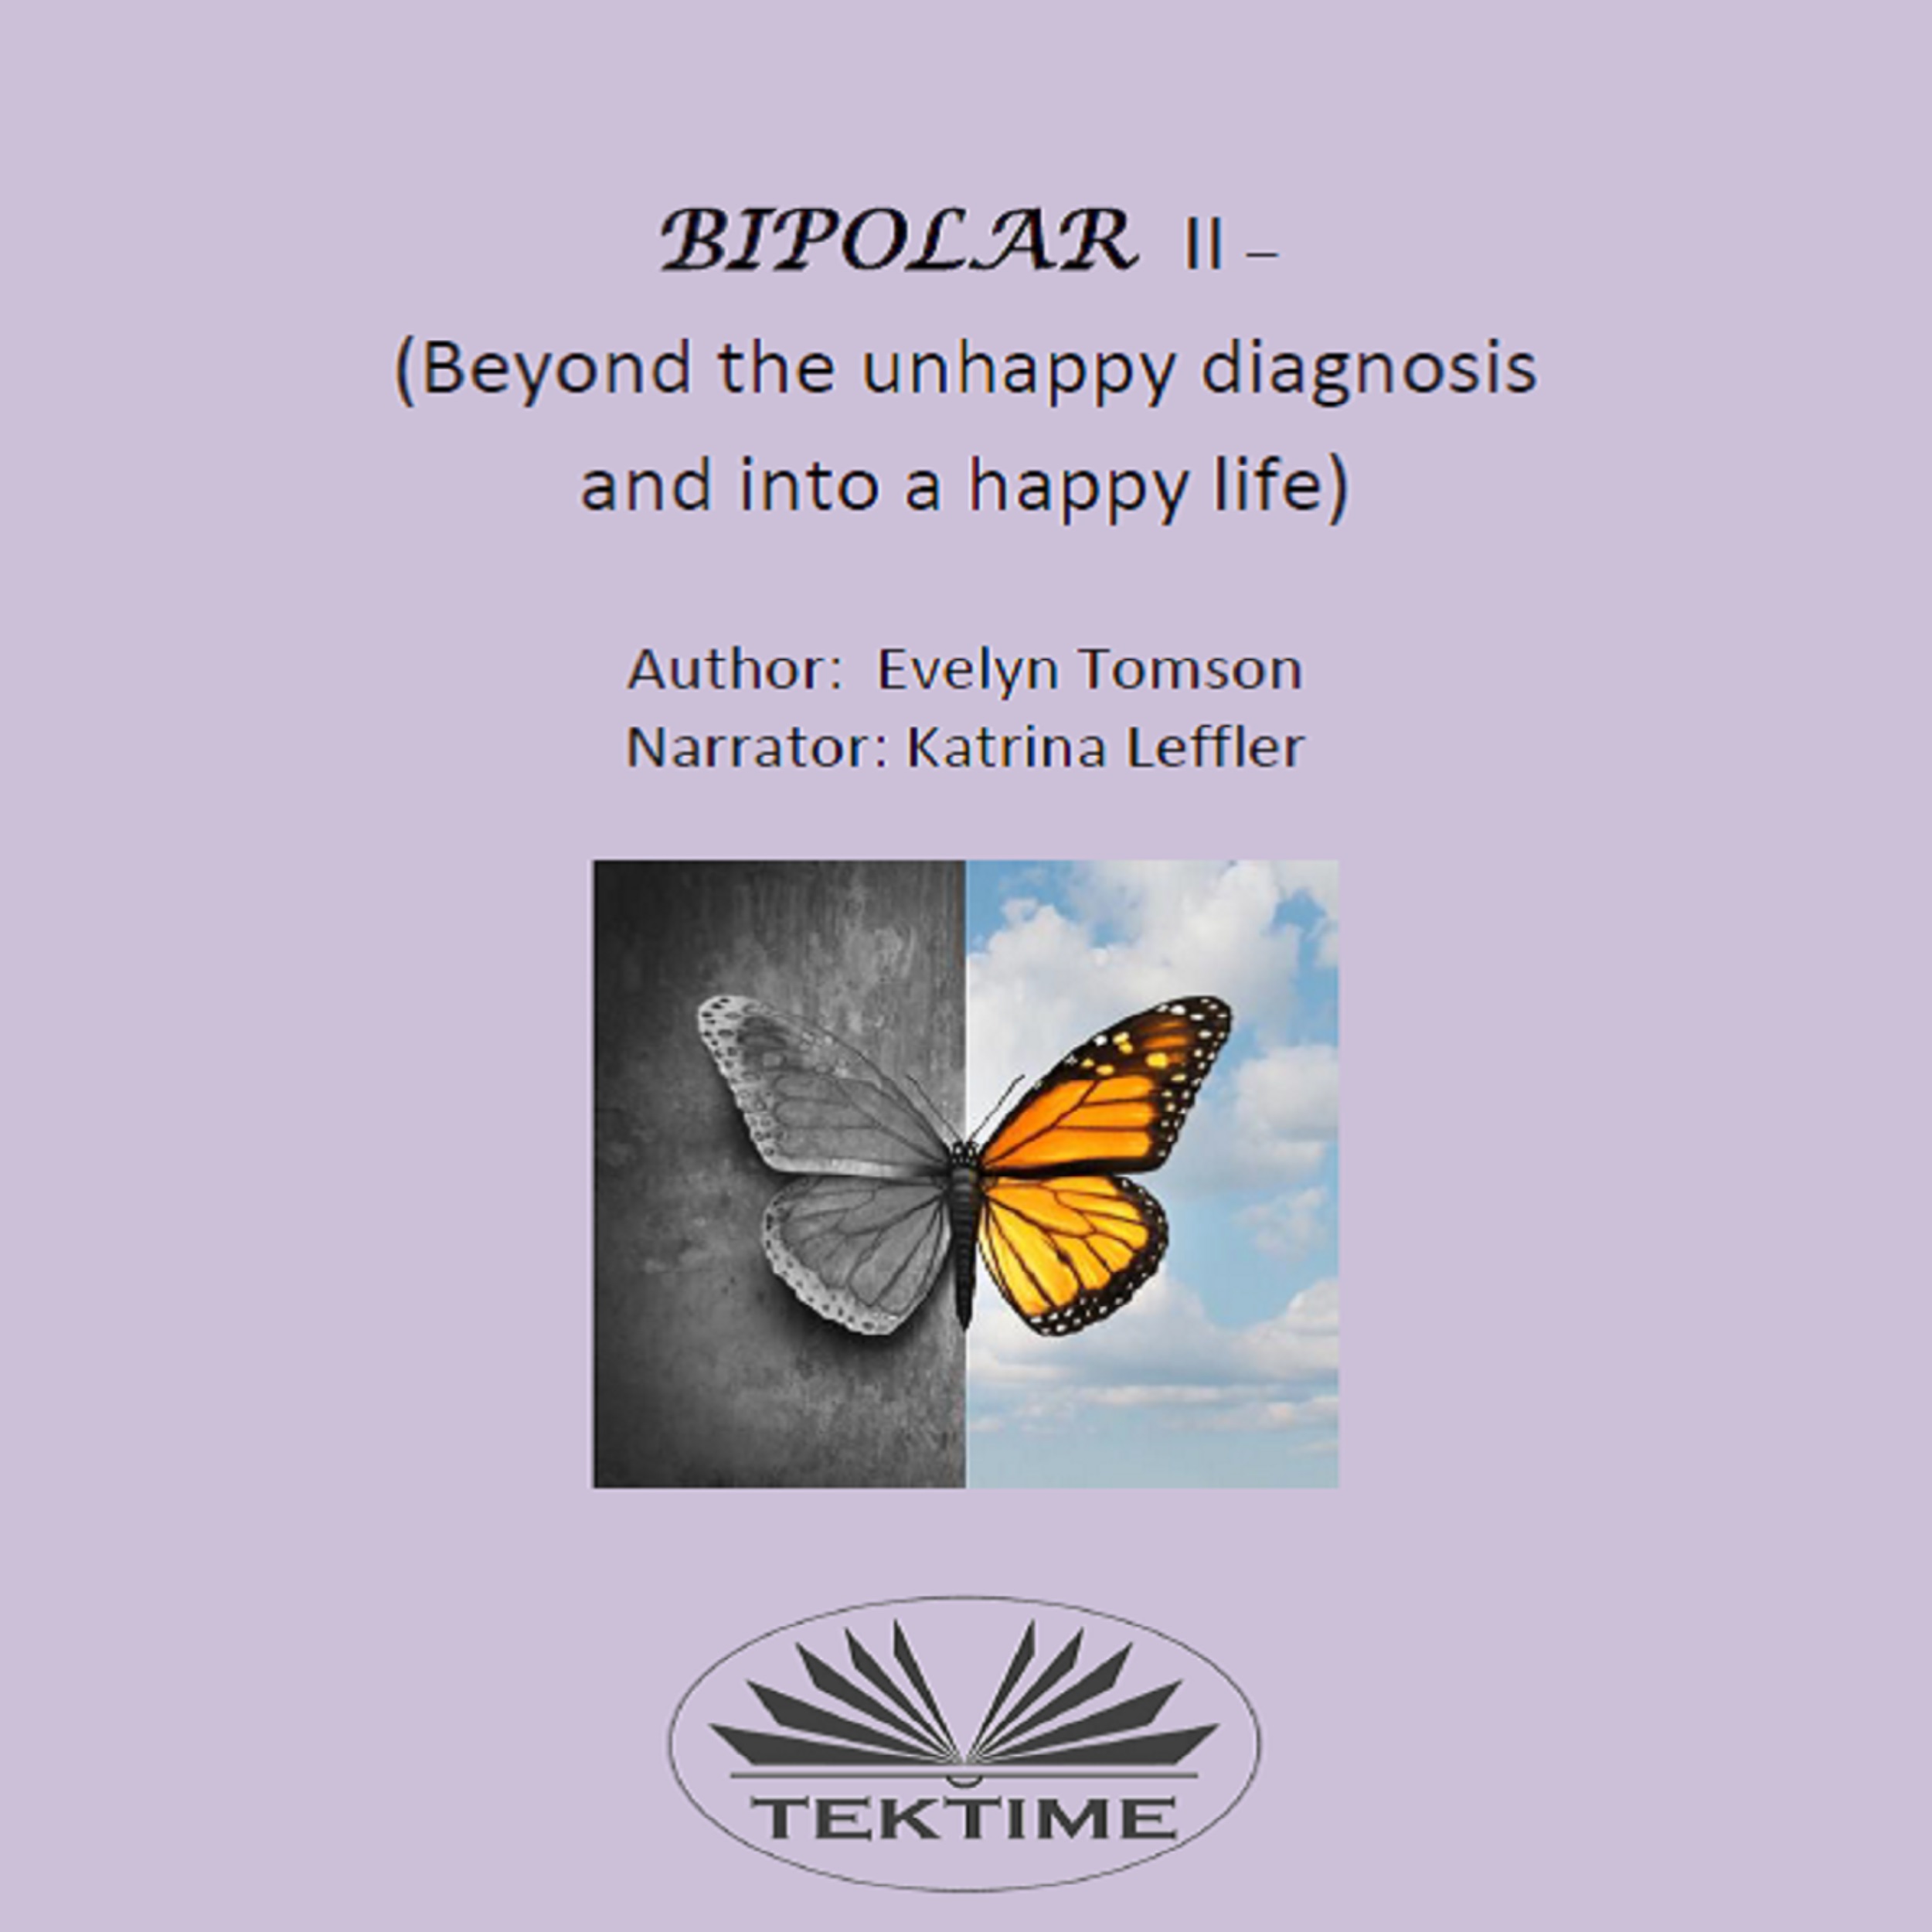 Bipolar II - (Beyond The Unhappy Diagnosis And Into A Happy Life) written by Evelyn Tomson and narrated by Katrina Leffler 